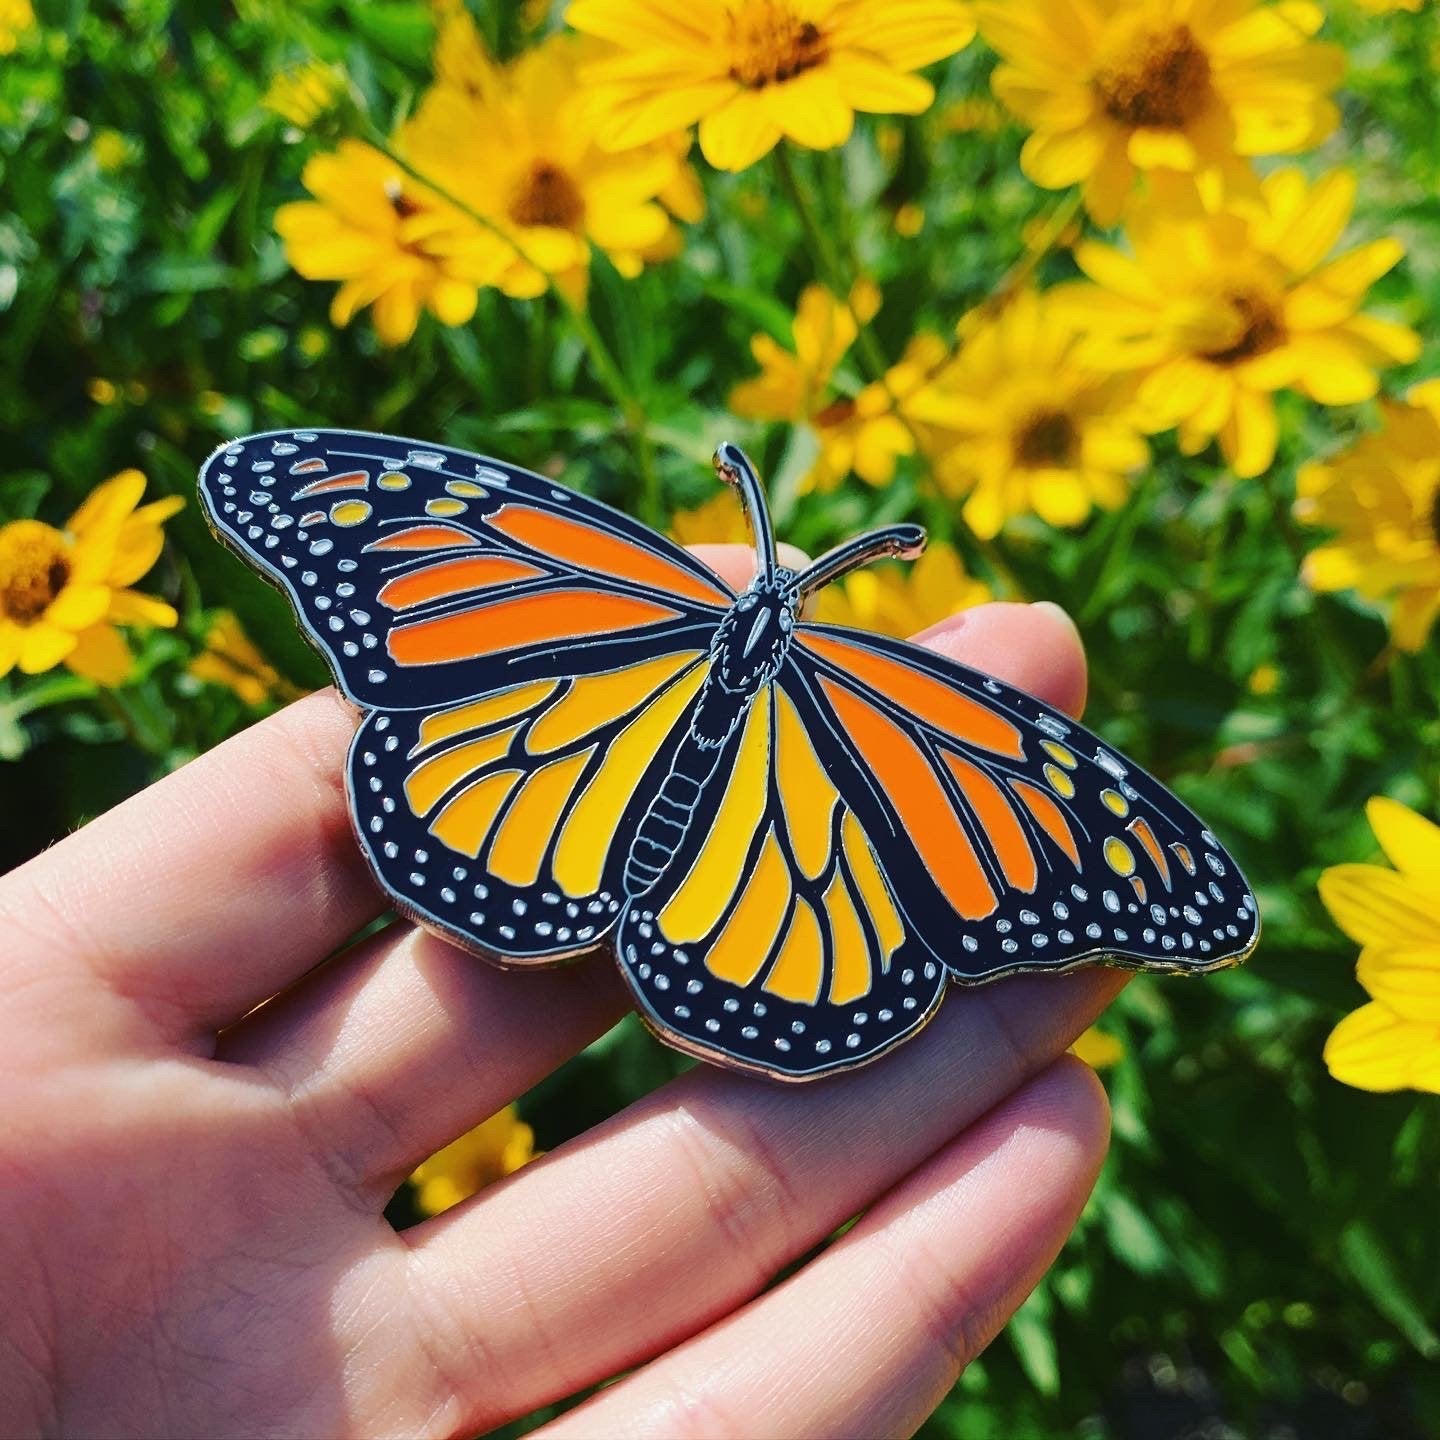 A black, orange, and white monarch butterfly (Danaus plexippus) enamel pin being held in a person's hand above yellow flowers. 